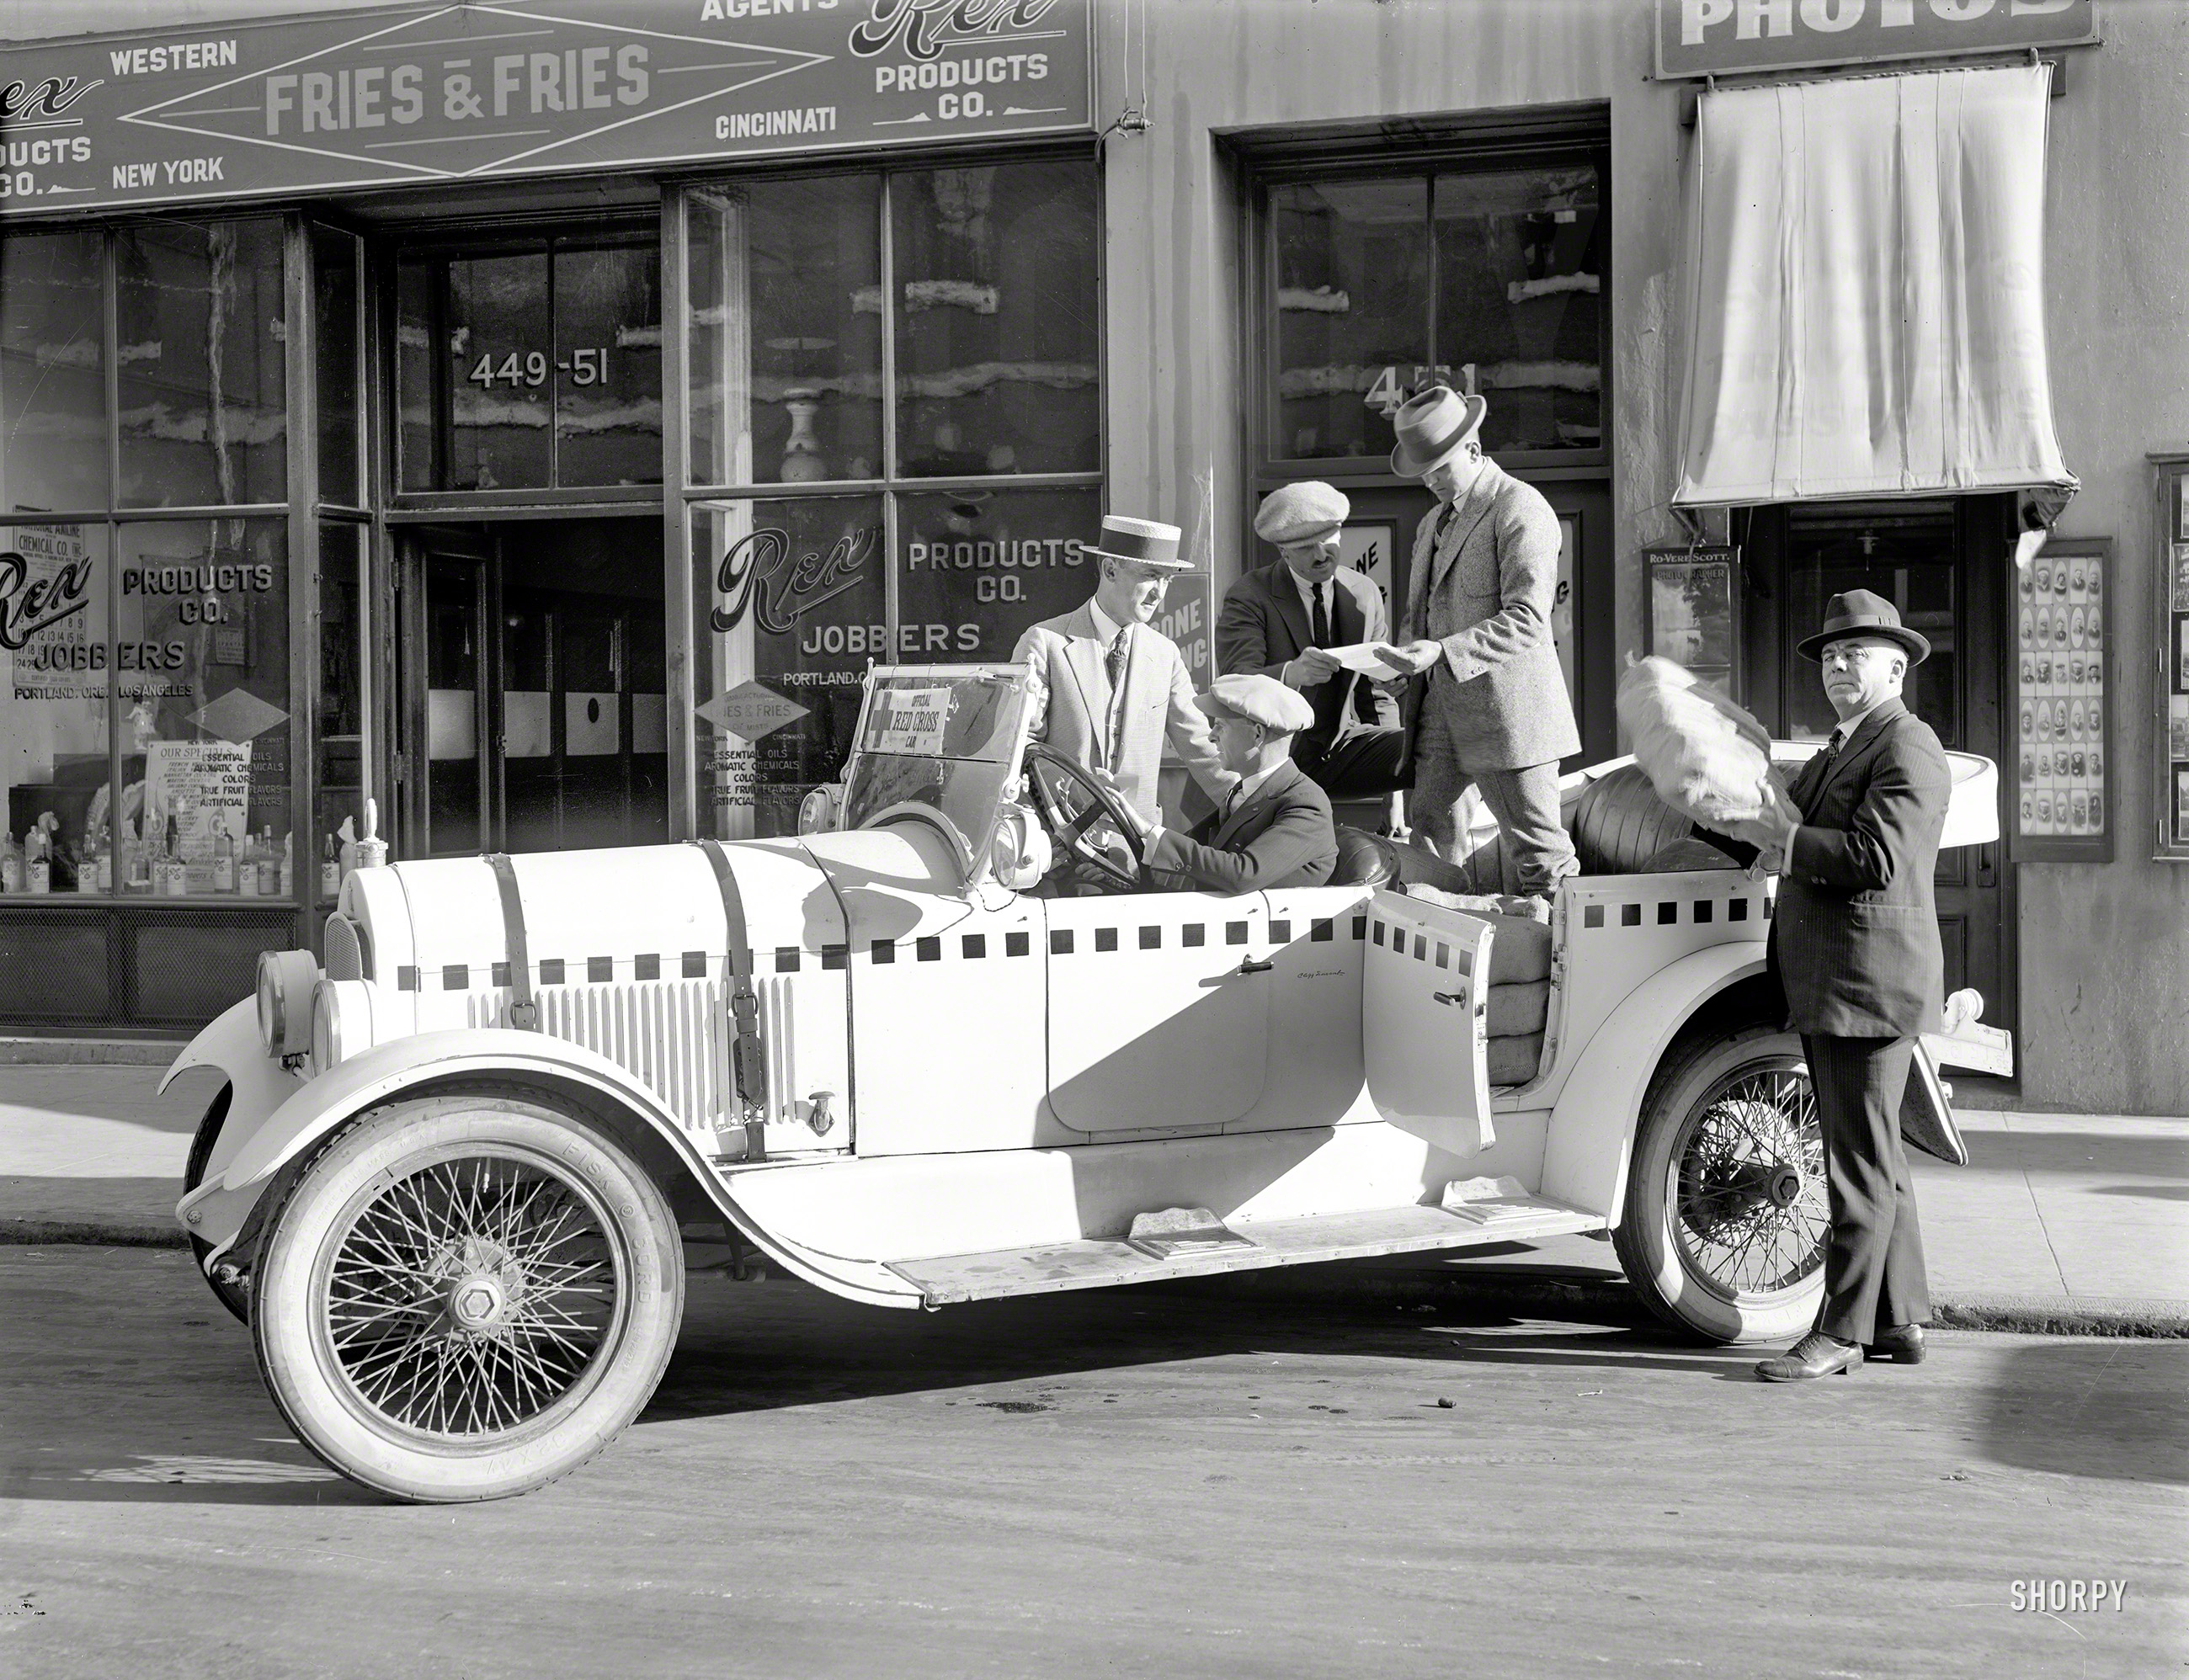 San Francisco, 1922. "Official Red Cross car." Being loaded with sacks of something outside the premises of Rex Products Co., Jobbers. Also note the studio of Rovere Scott, Photographer. 6½ x 8½ glass negative. View full size.